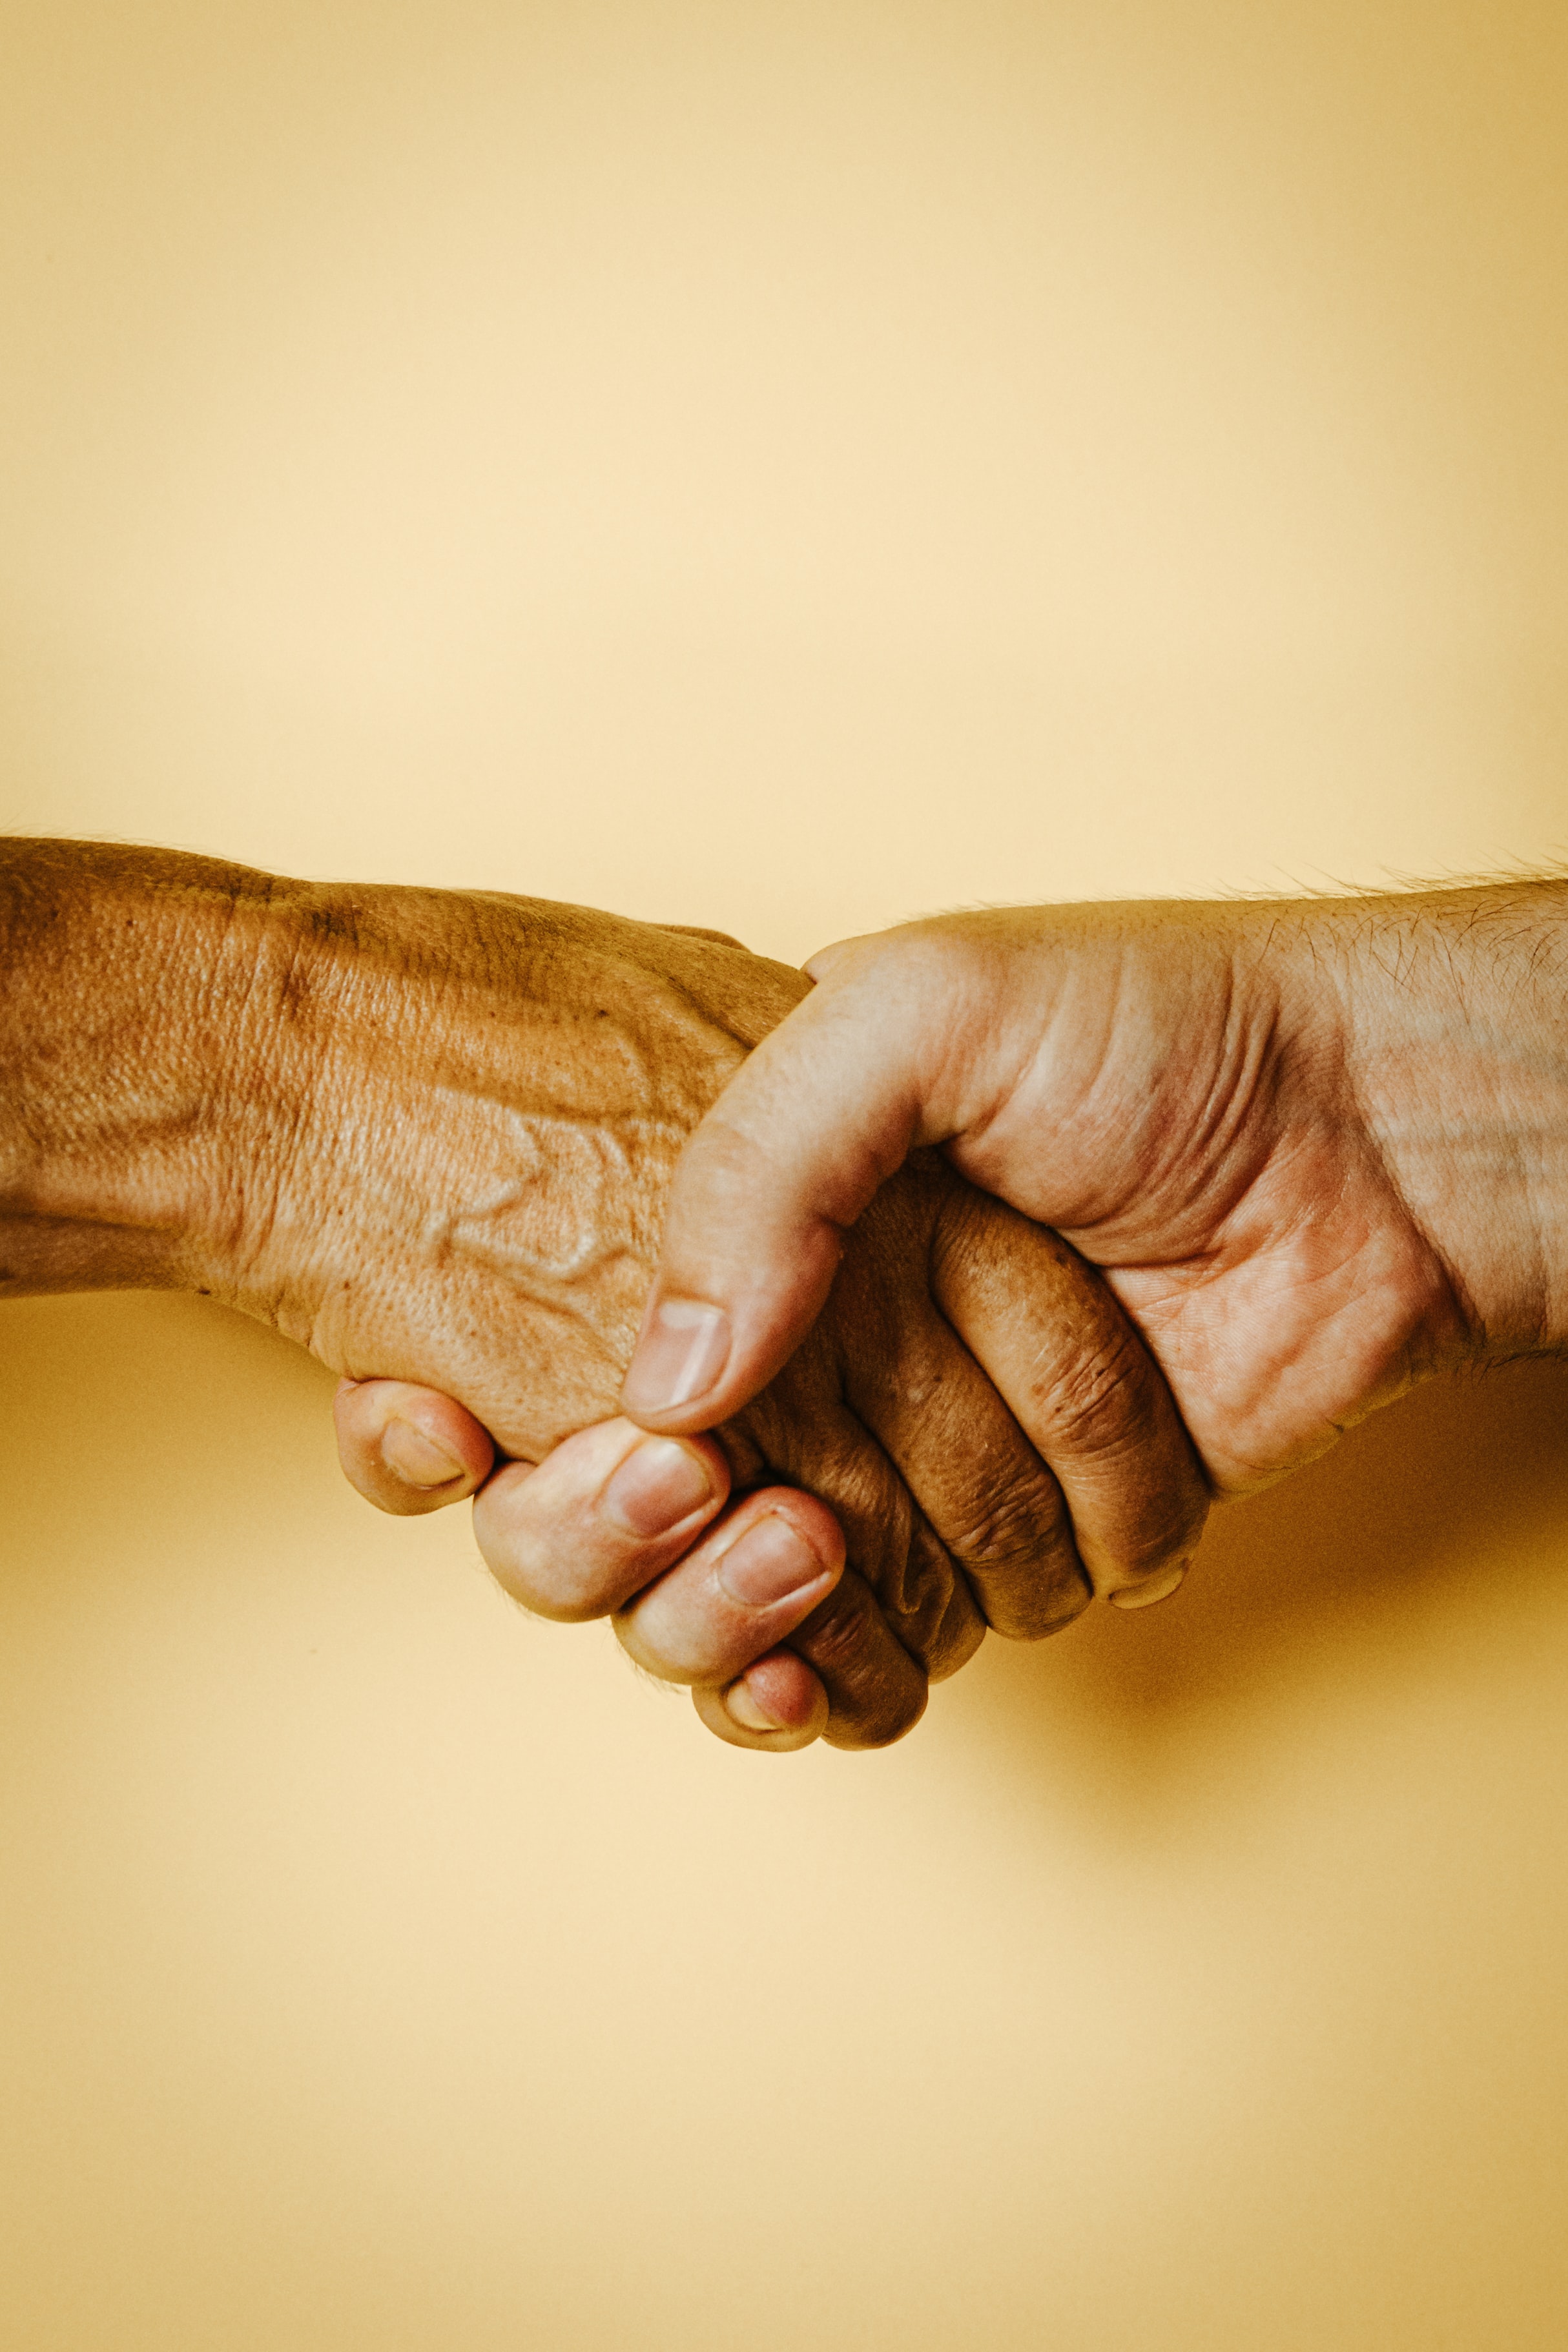 A handshake on a yellow background 